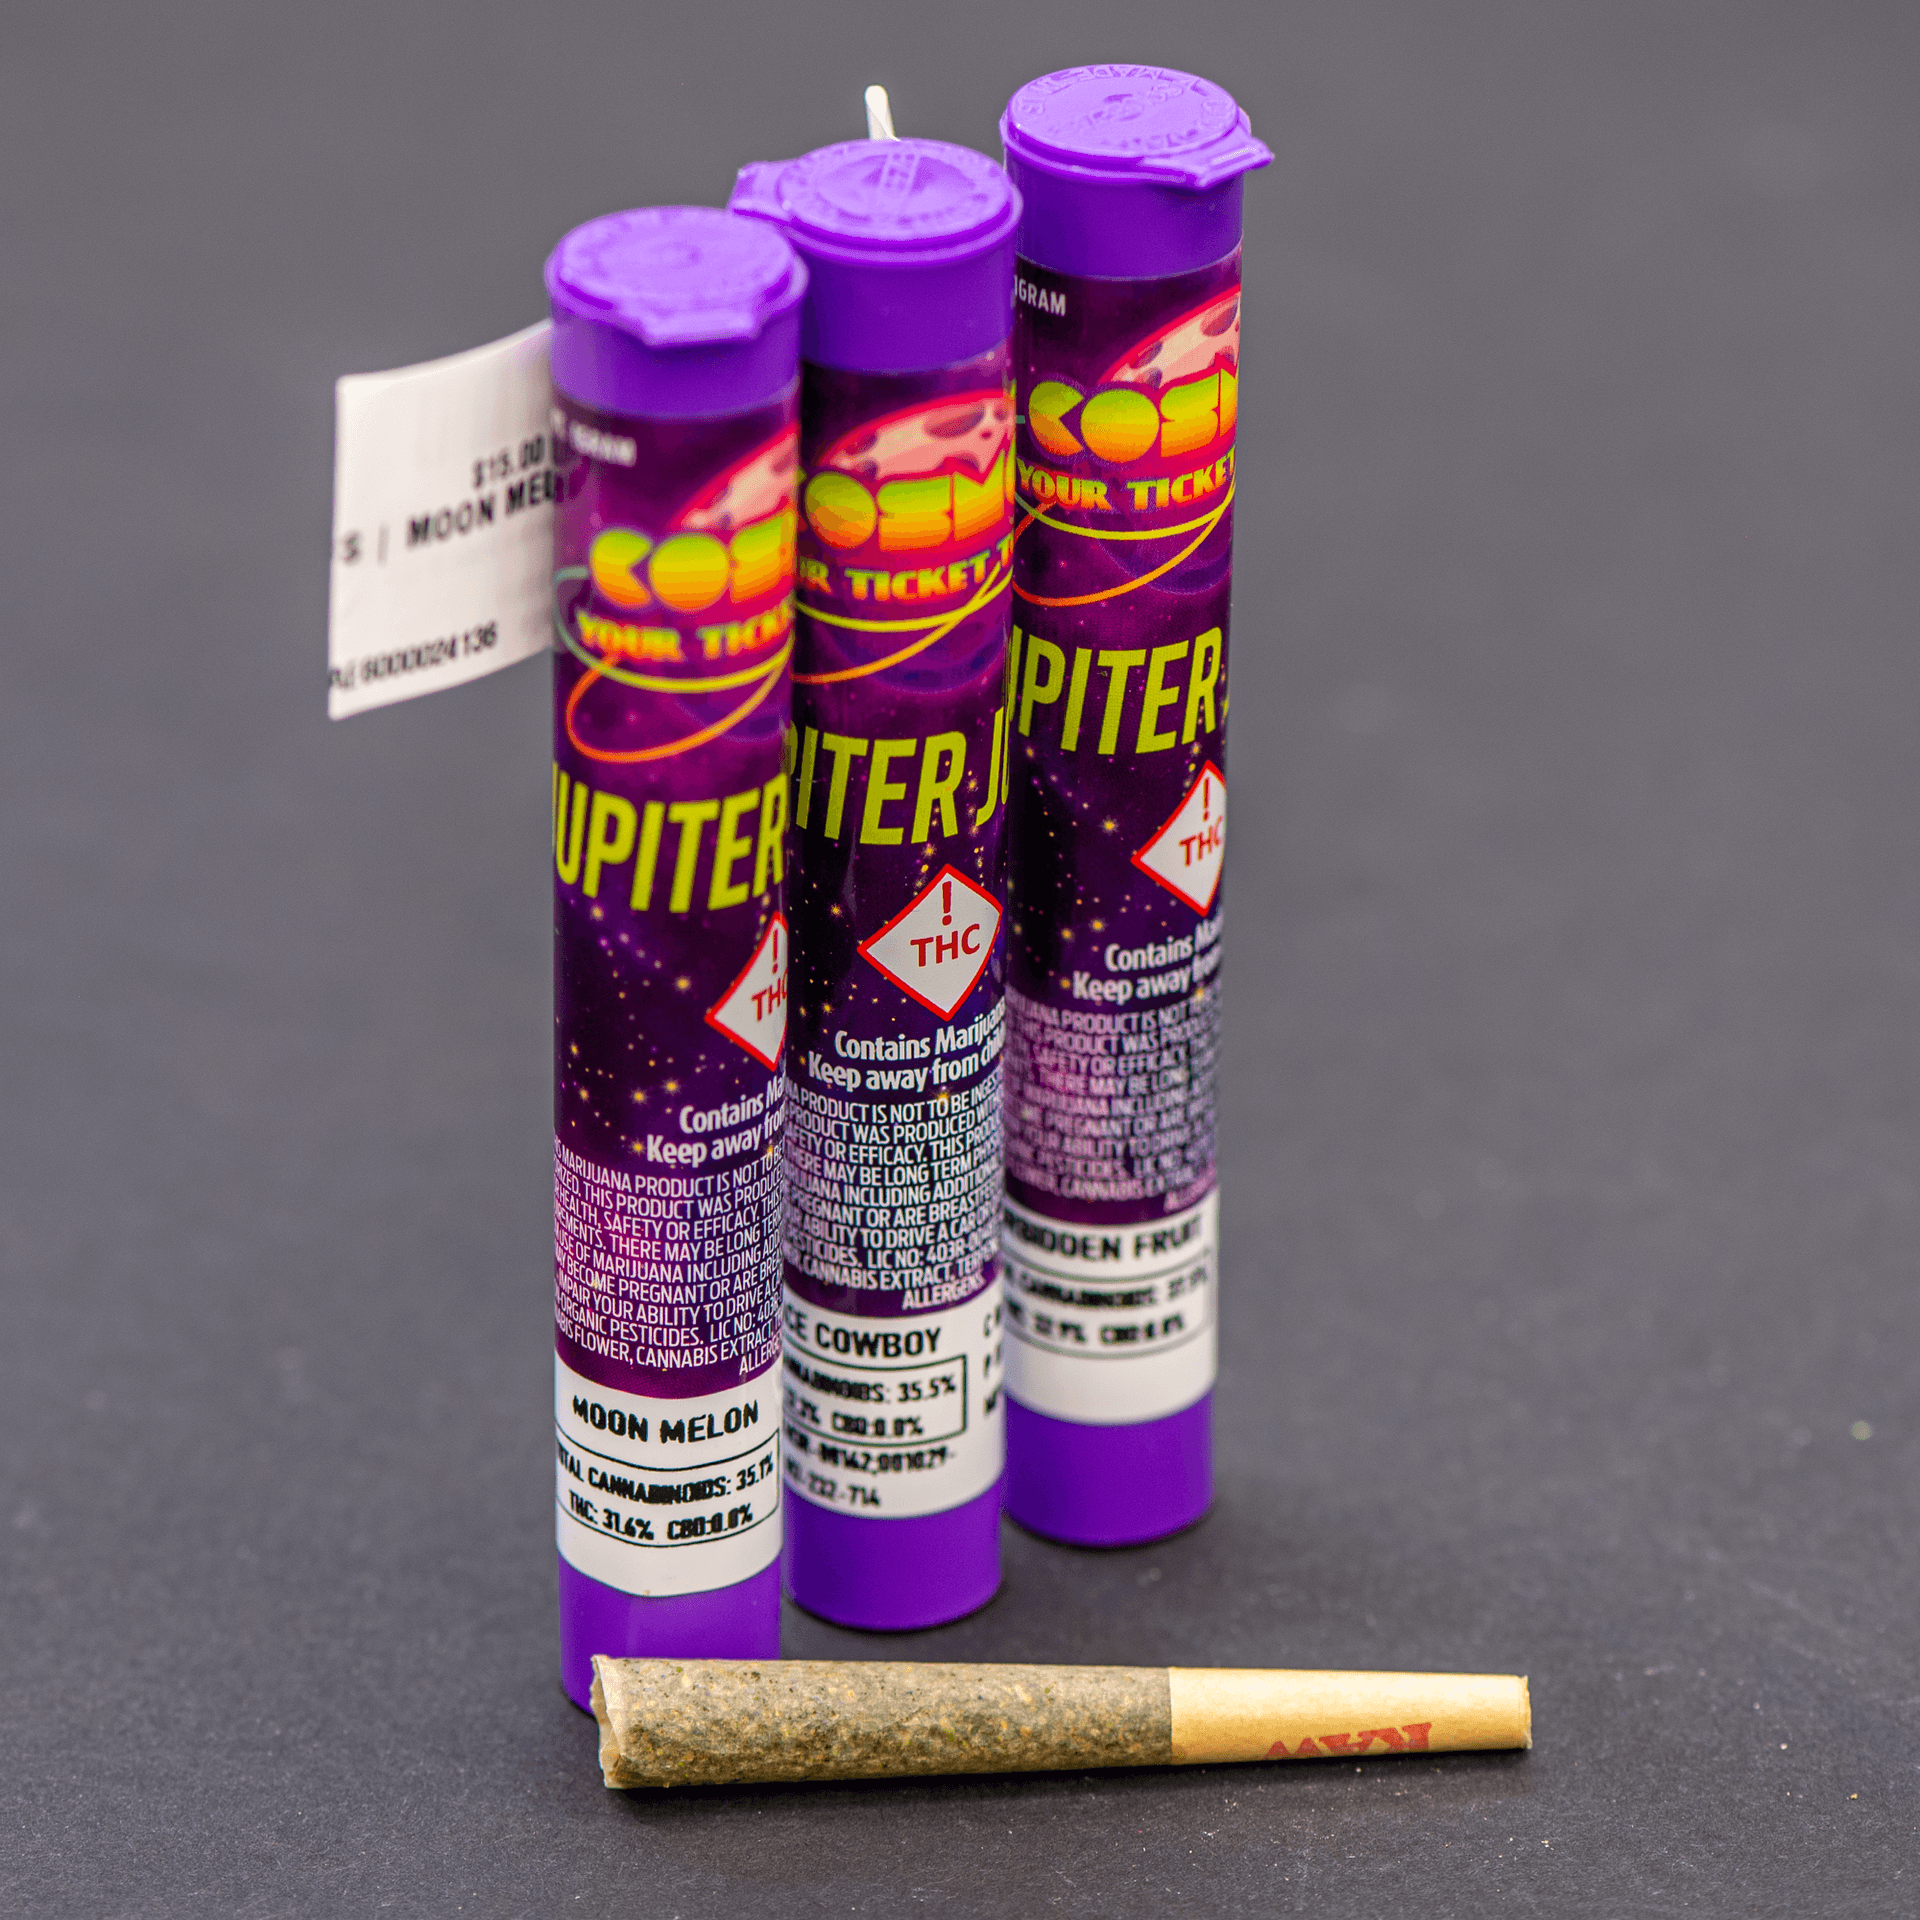 High quality pre-roll in a variety of strains